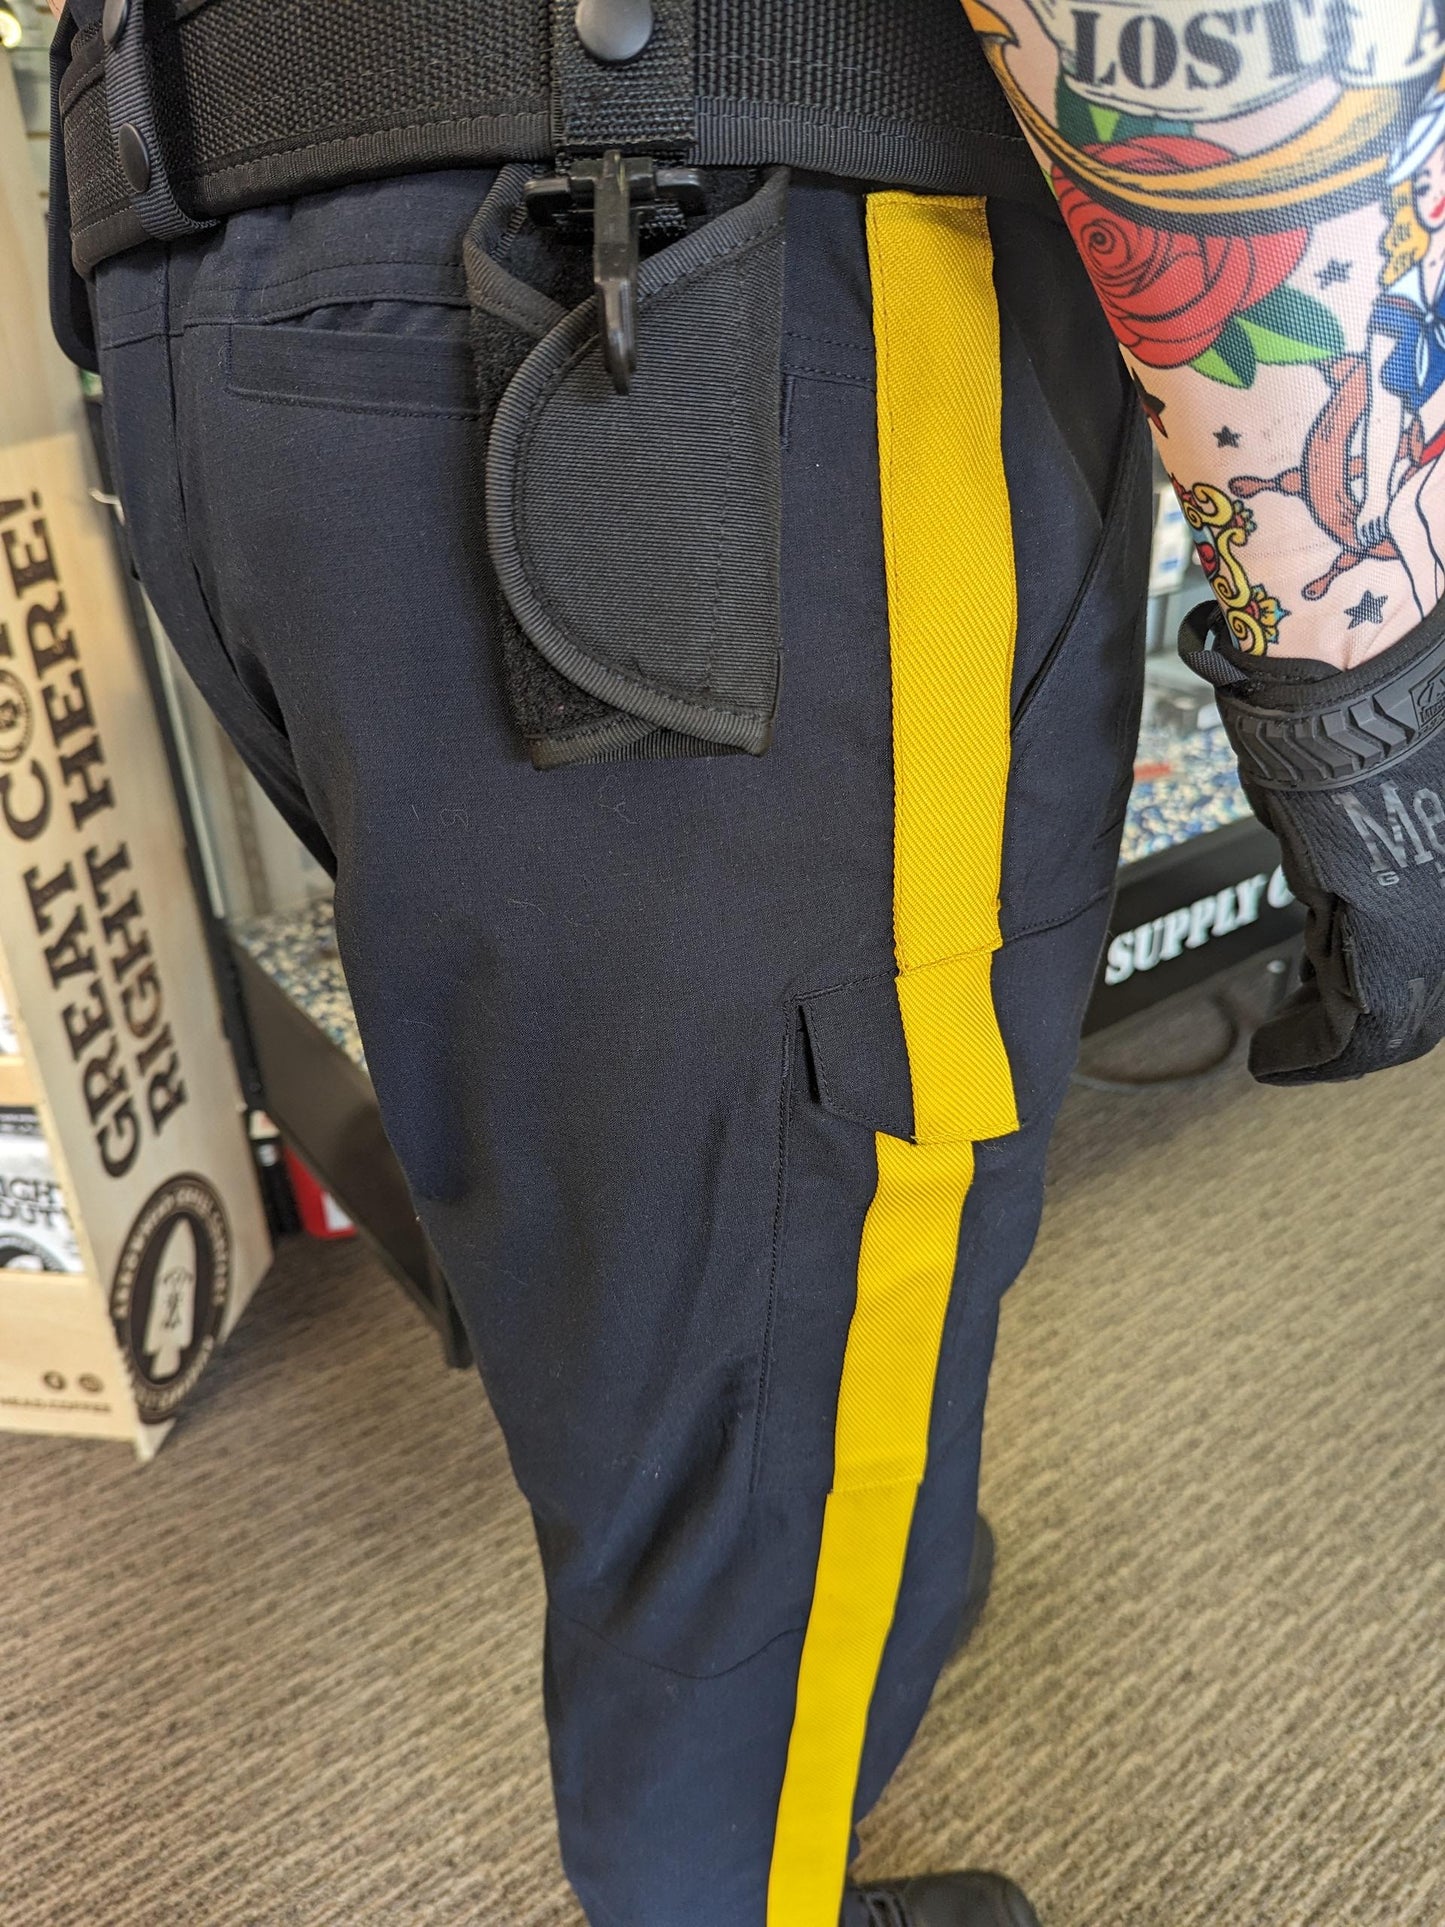 RCMP Braided V2 Tactical Pant Men's and Women's